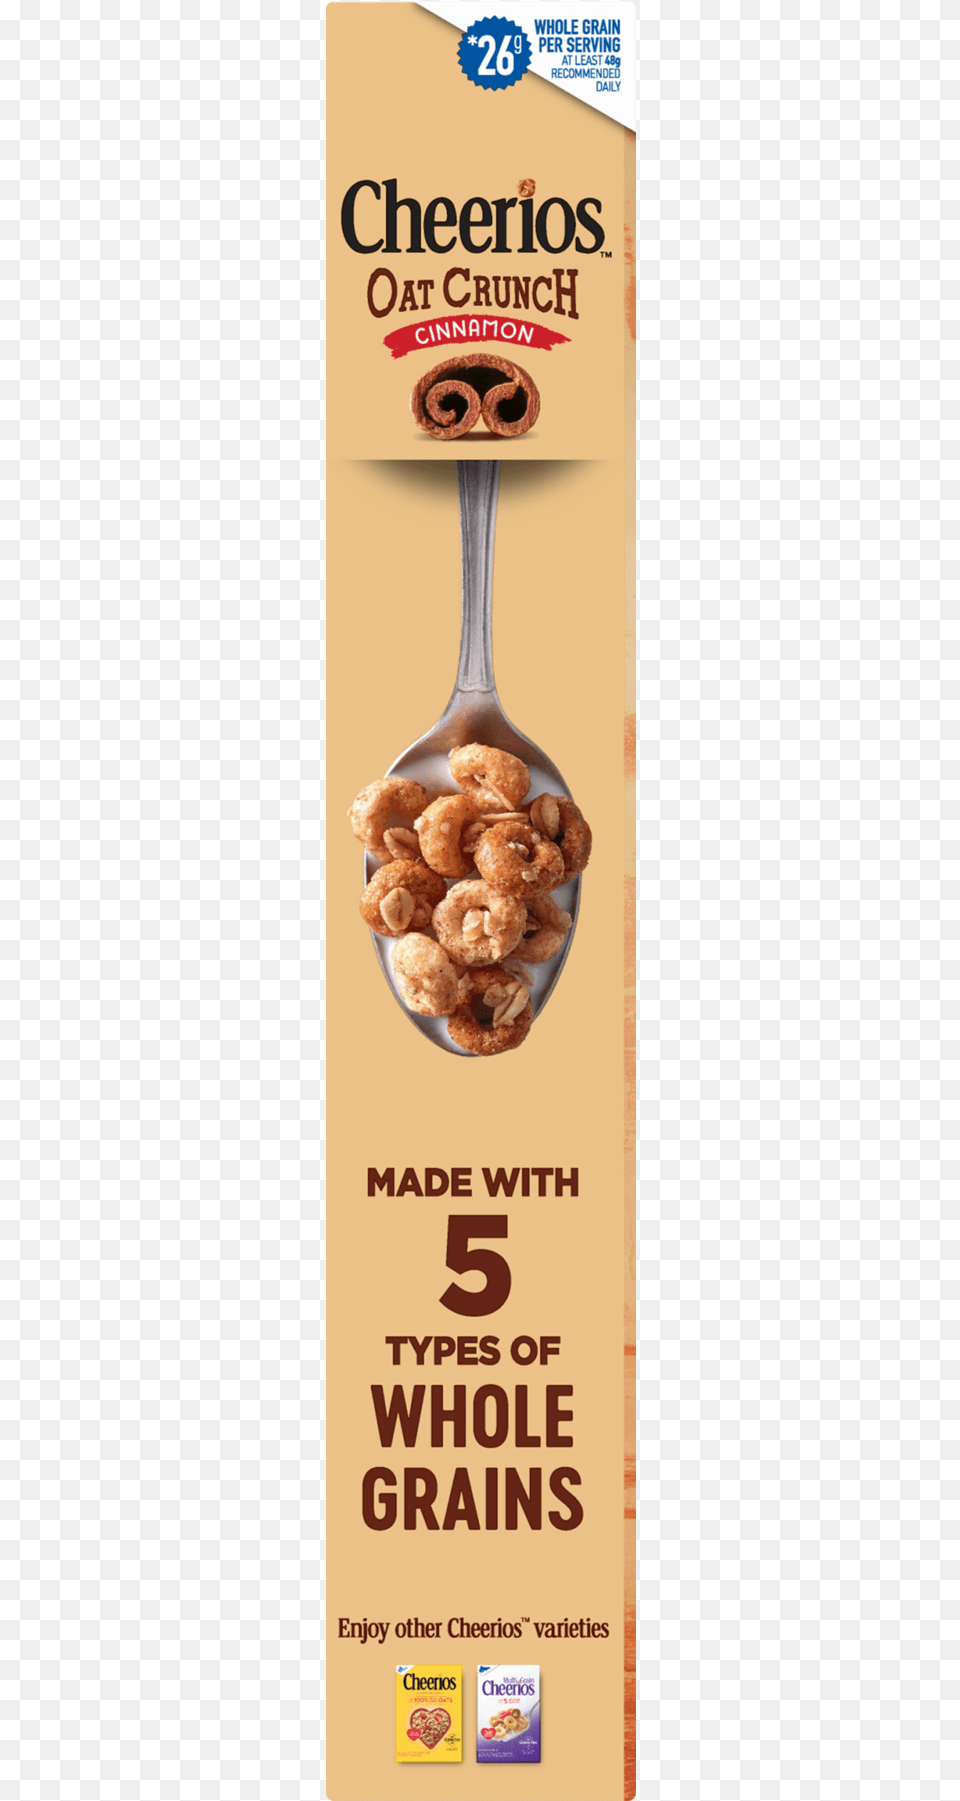 Cheerios Oat Crunch Cinnamon Family Size Cereal, Advertisement, Poster, Cutlery, Spoon Png Image